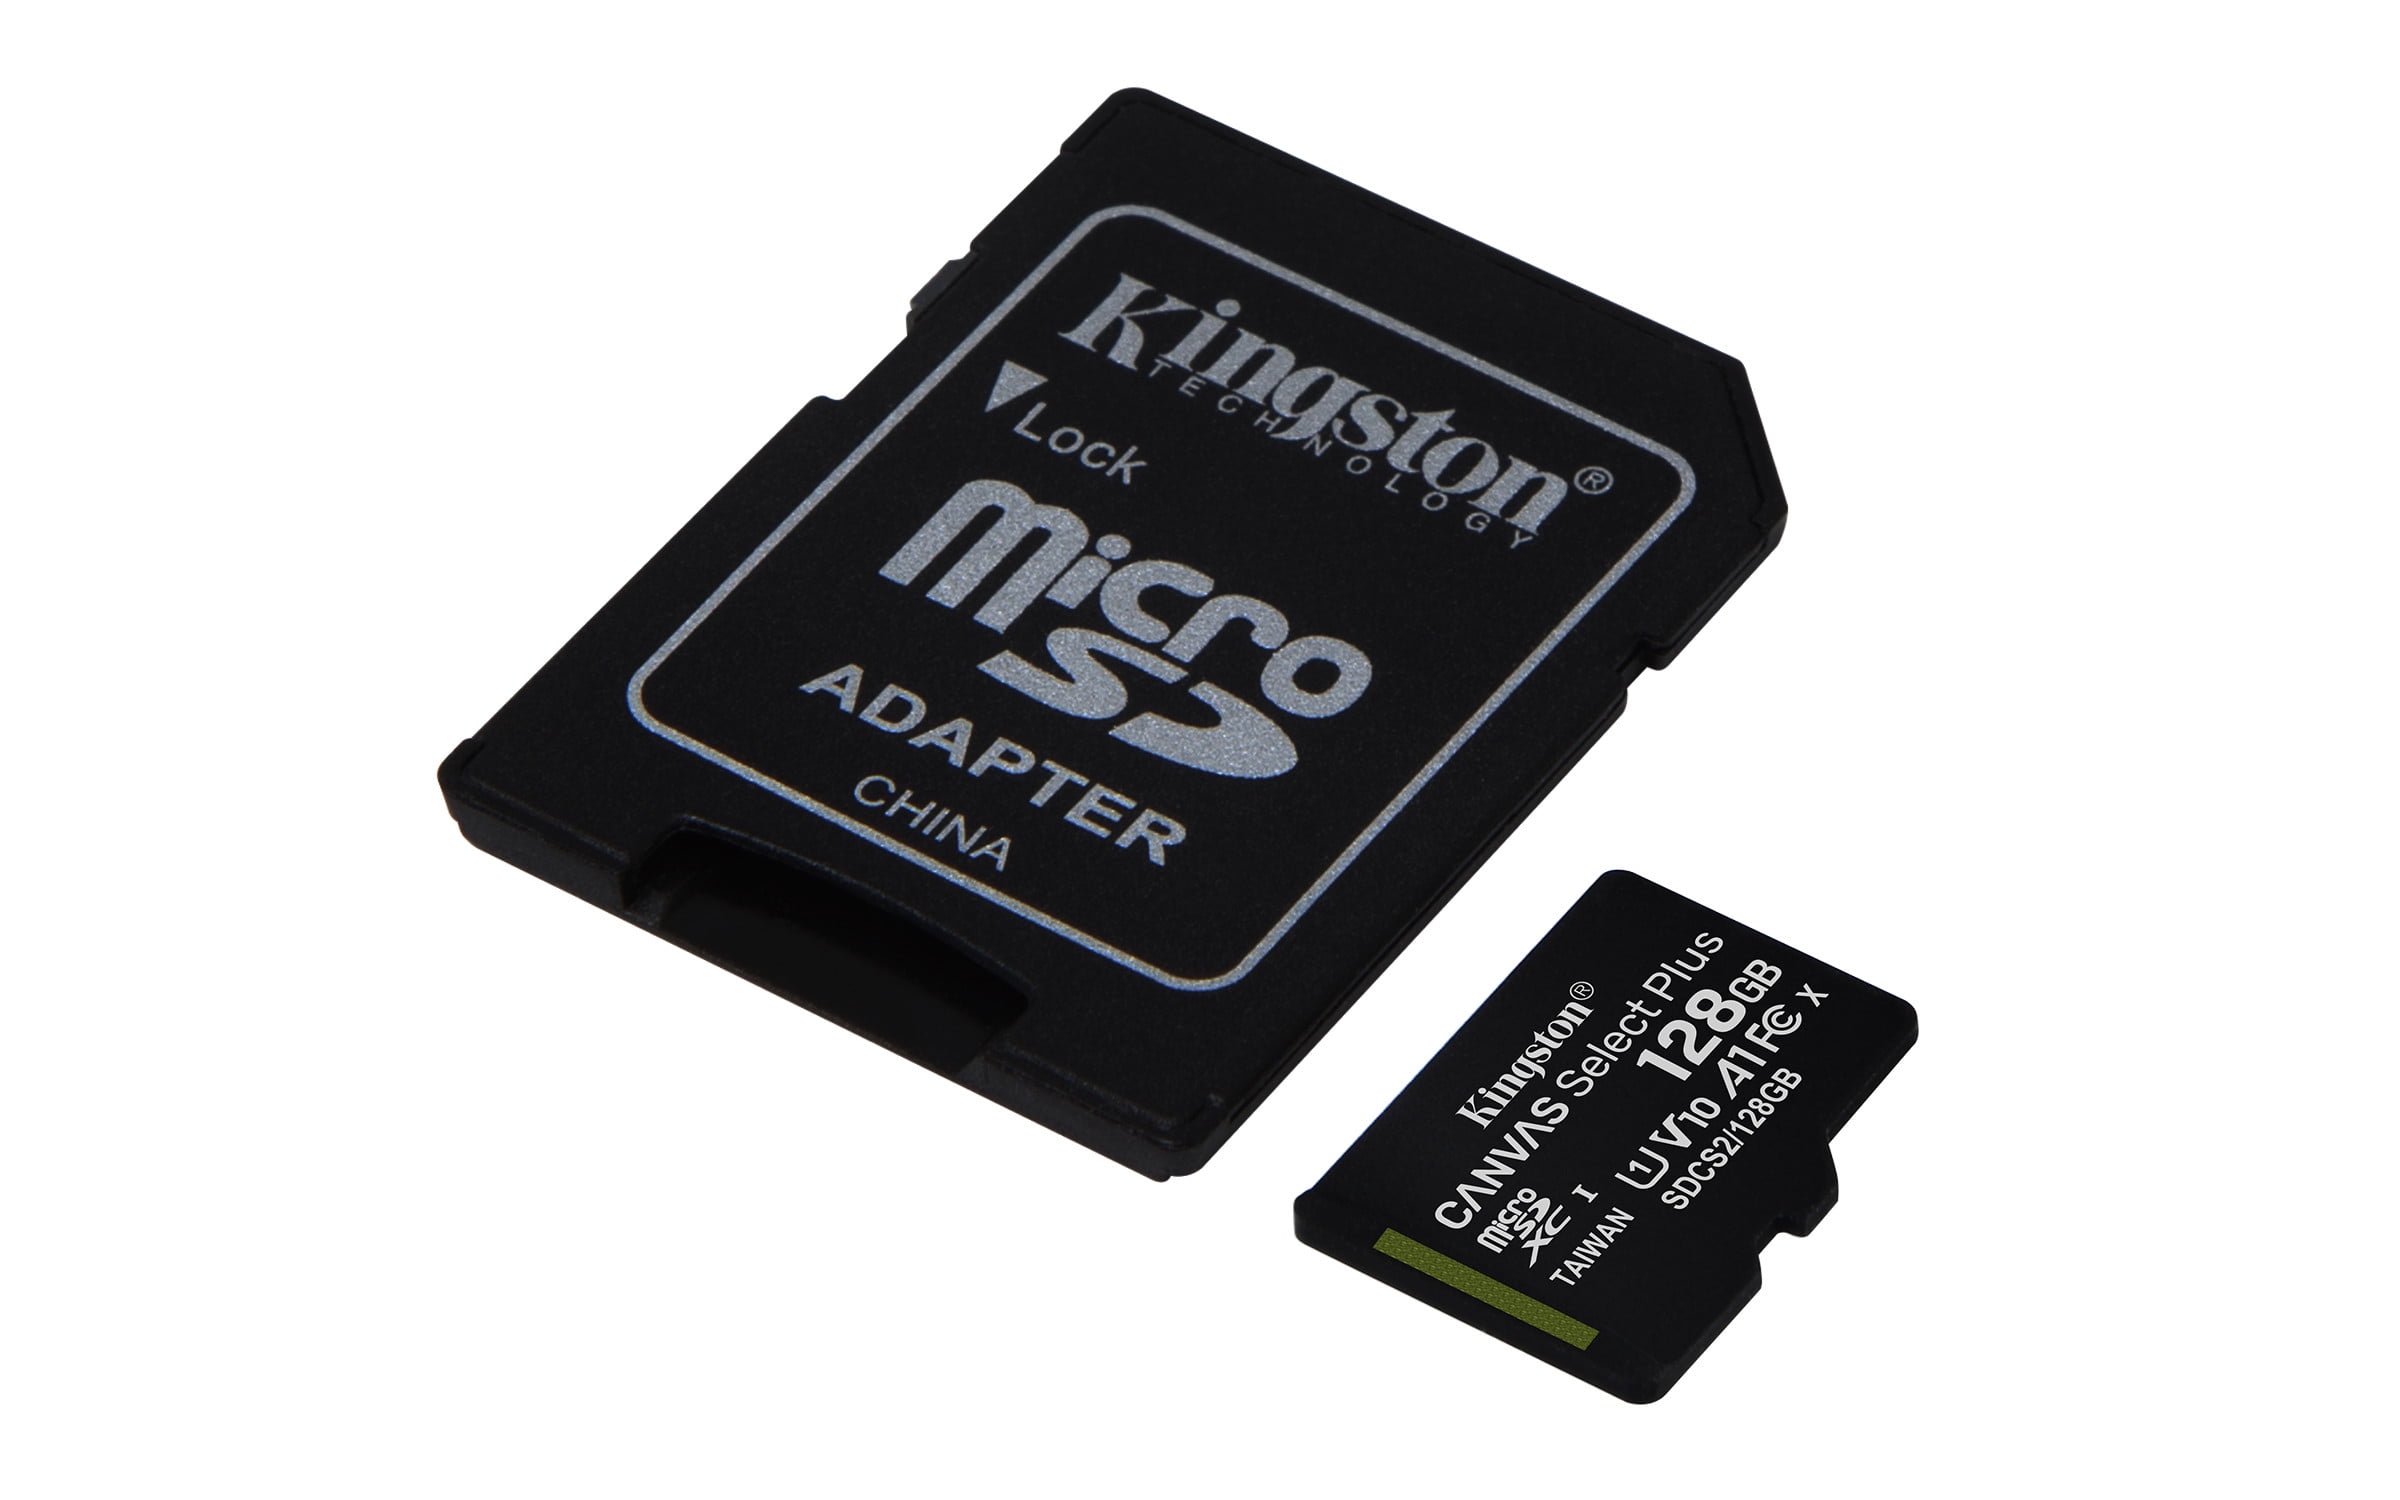 Kingston 128GB RAM Mounts CDS Straight Cable Upgrade MicroSDXC Canvas Select Plus Card Verified by SanFlash. 100MBs Works with Kingston 